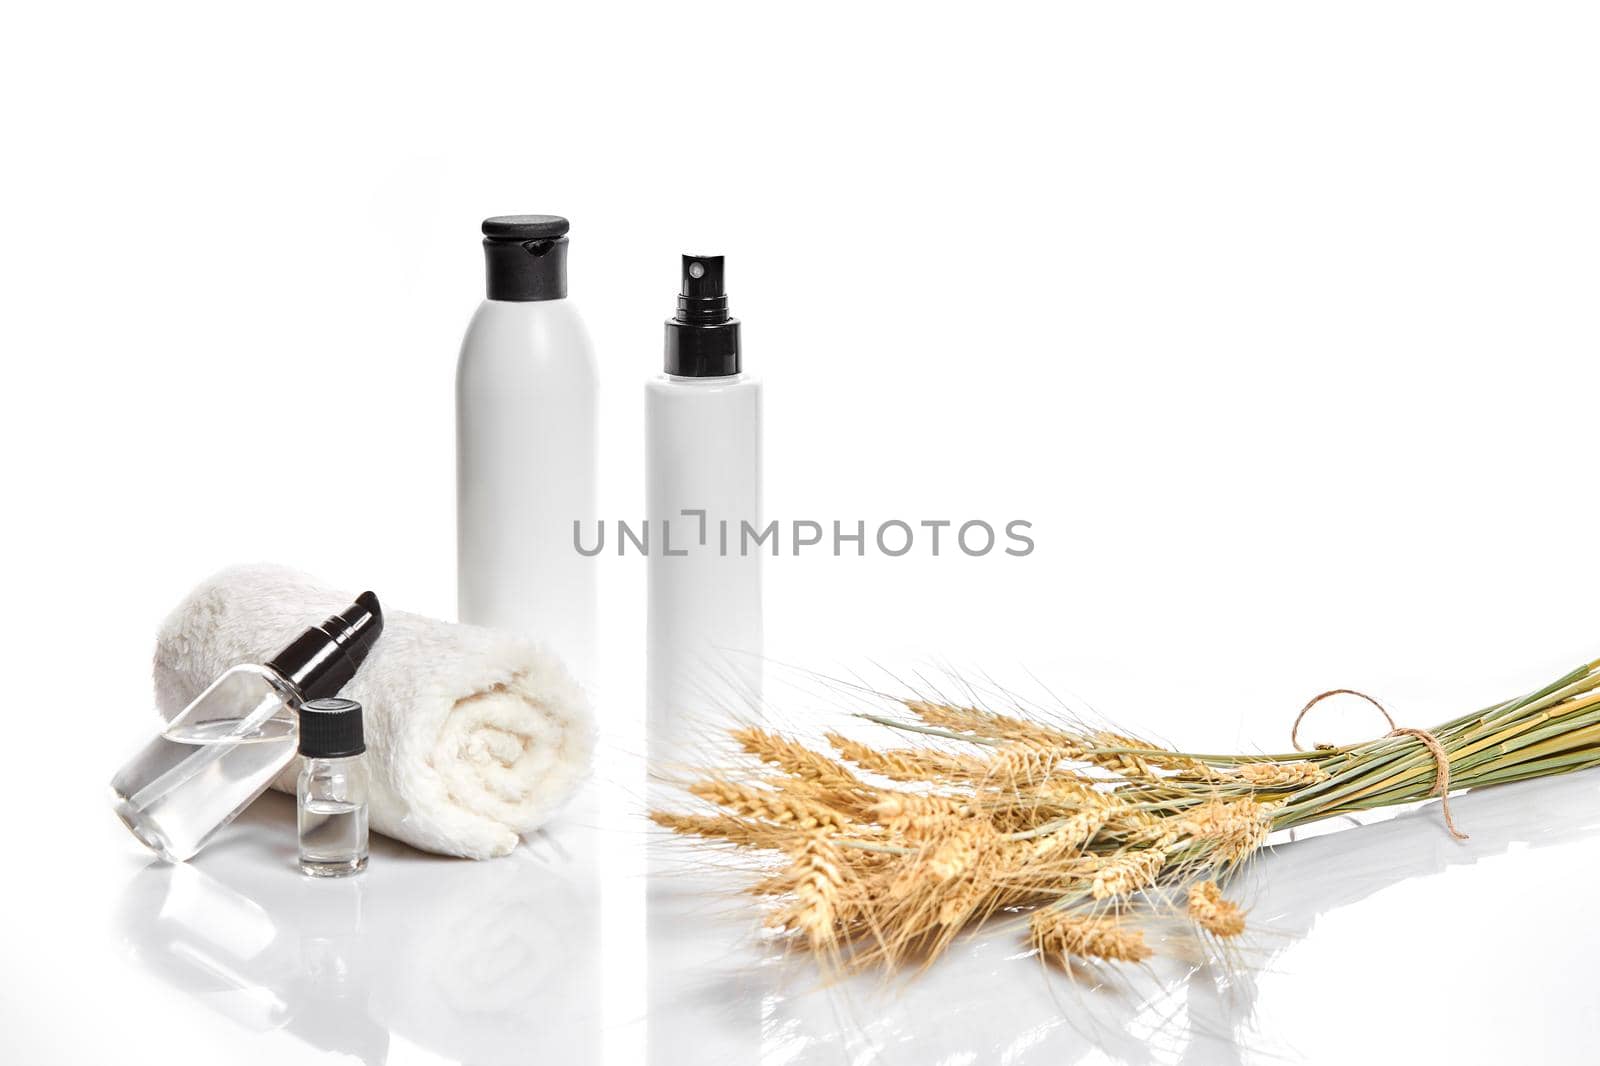 Herbal and mineral skincare. Jar of cream, oil with wheat, white cosmetic bottles. Without label by nazarovsergey